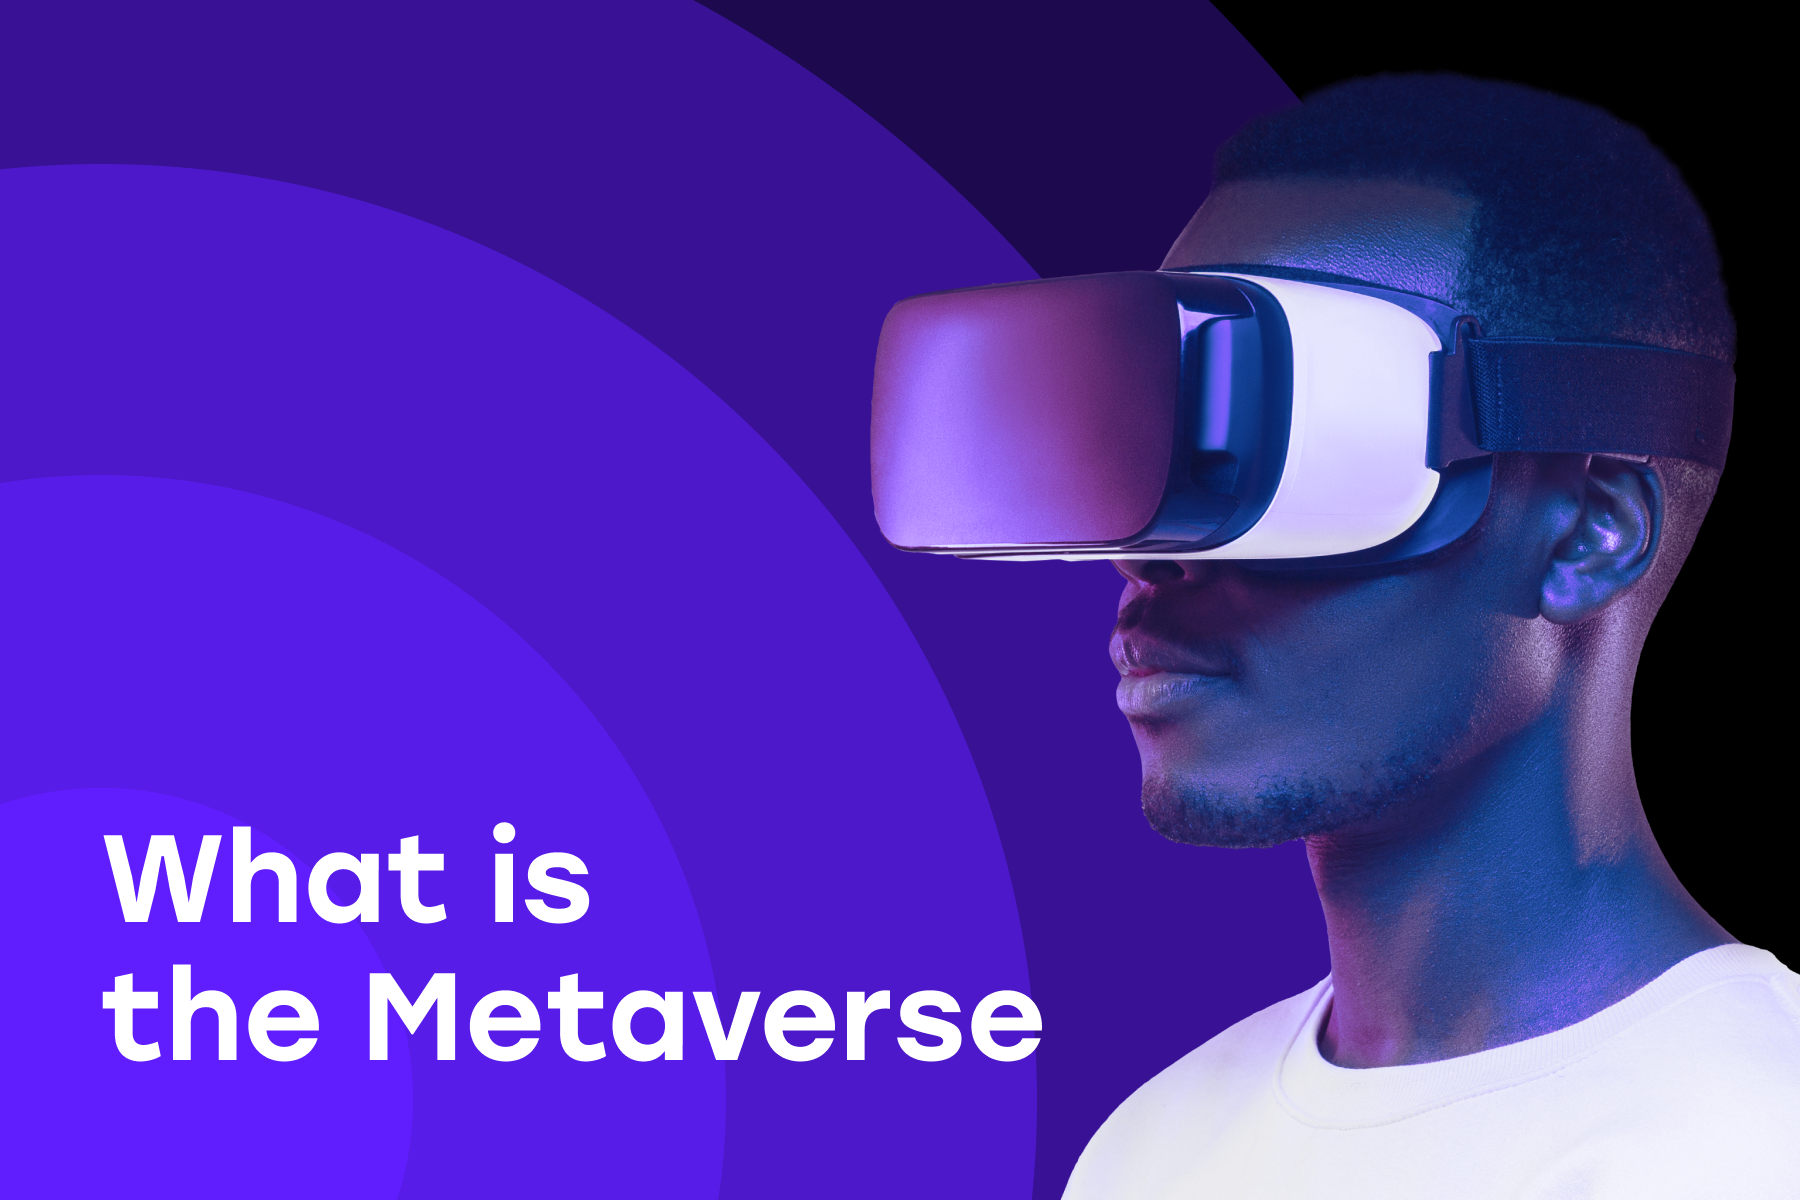 The Metaverse: What is it and Why Does it Matter?